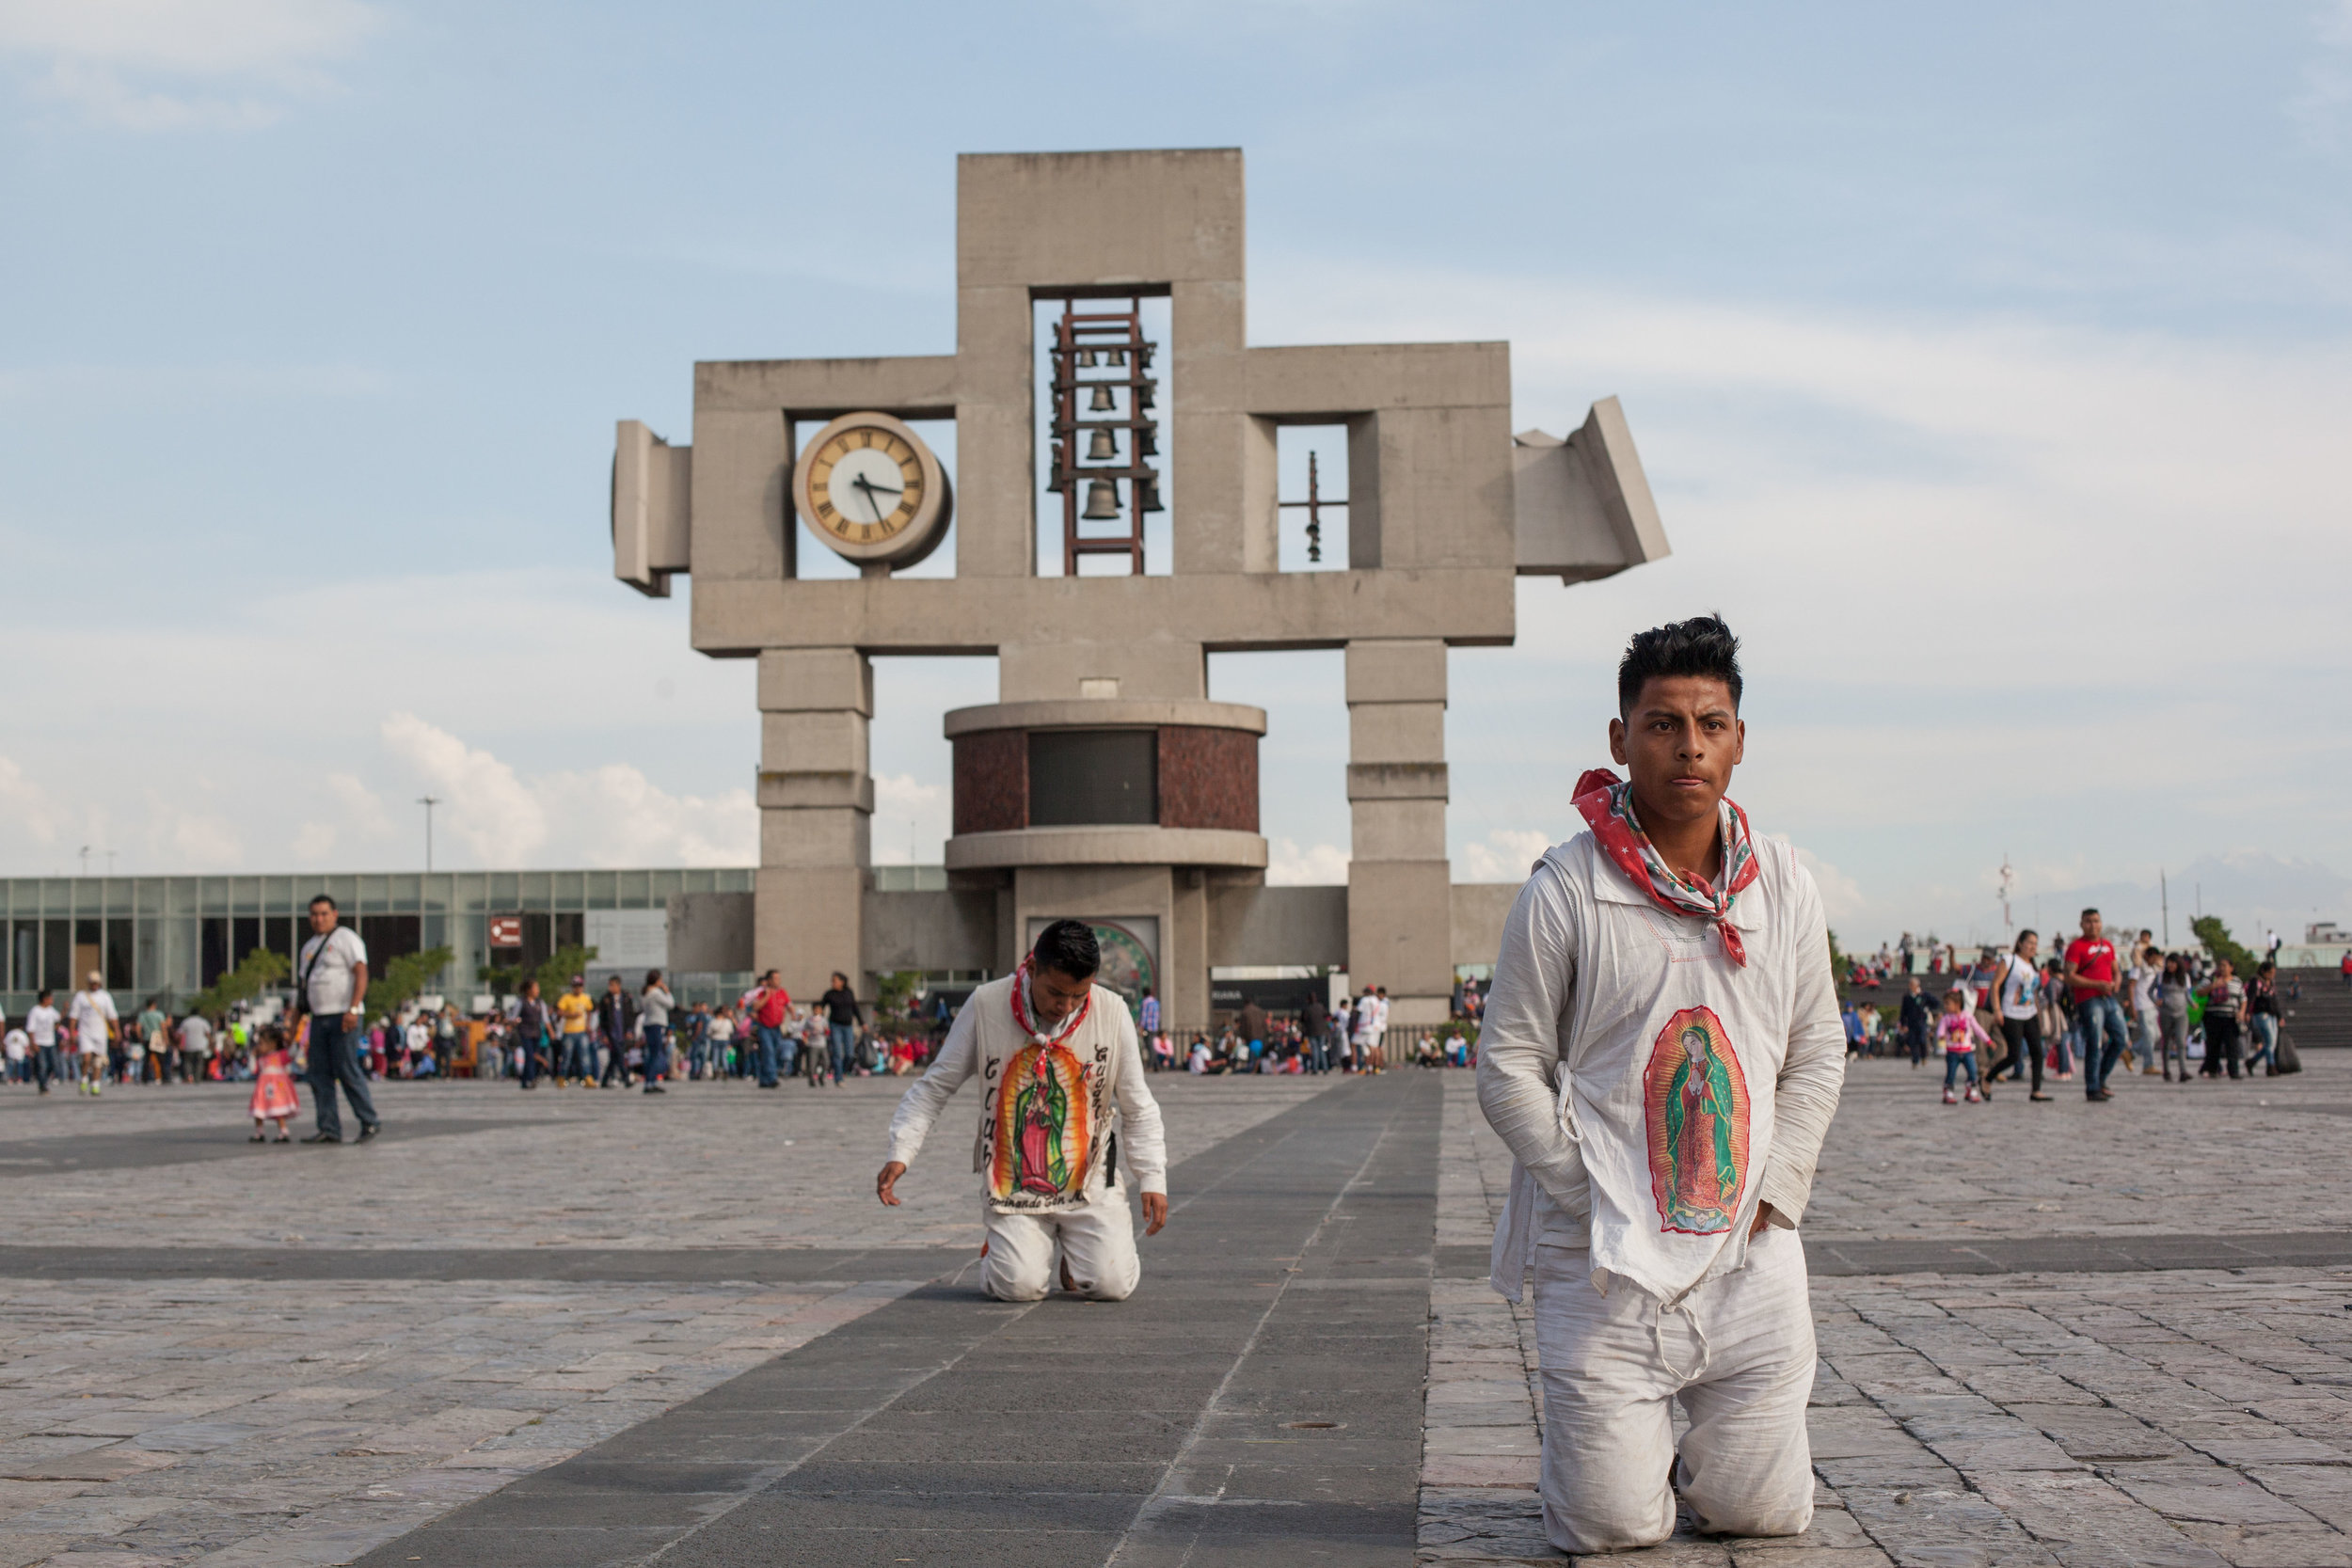 The Pilgrimage to the Basilica of Our Lady of Guadalupe, Mexico City (Photo Essay for the Second Issue of Dezine Magazine)